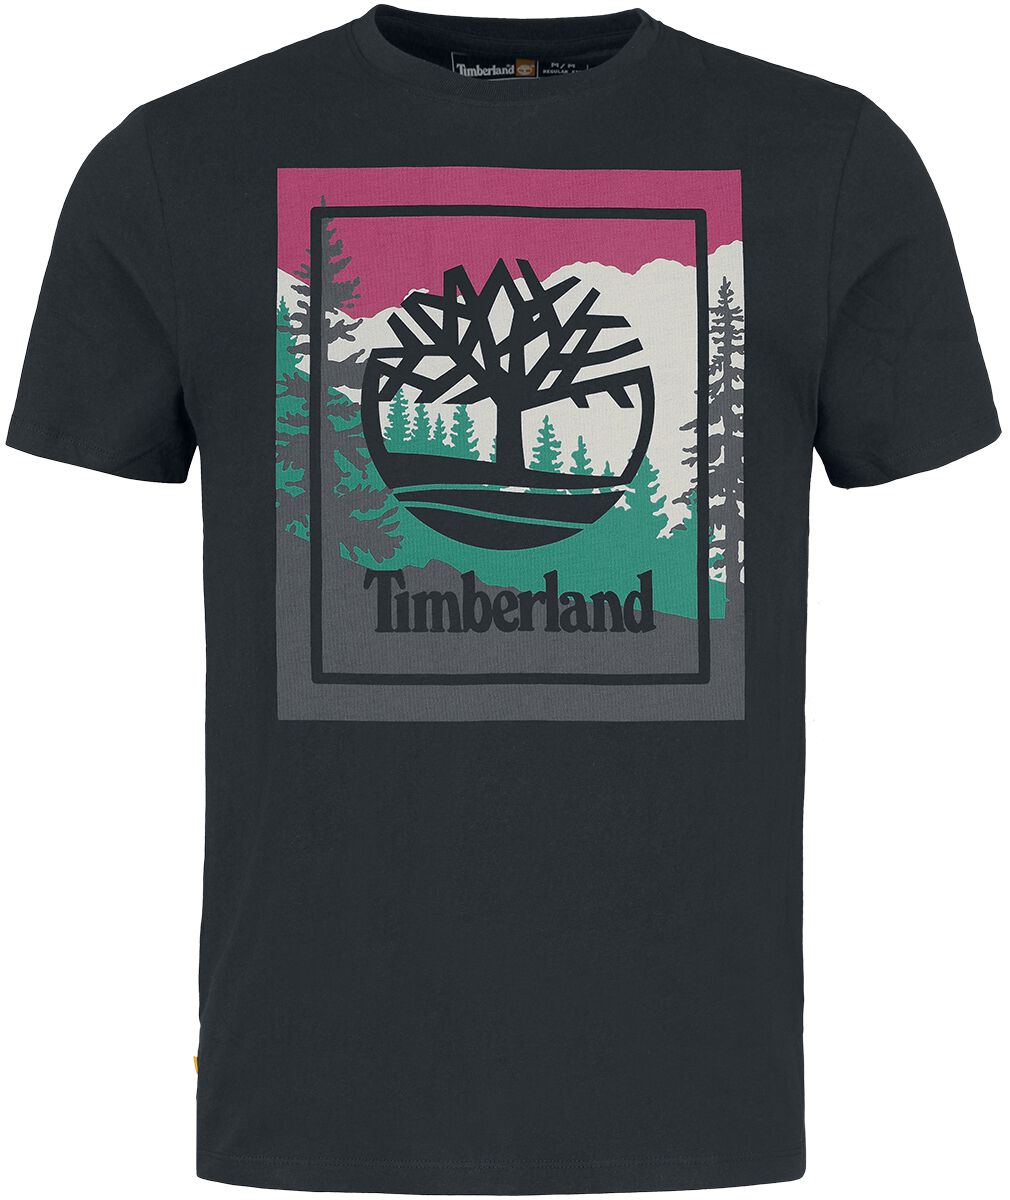 Timberland Outdoor Inspired Graphic Tee T-Shirt schwarz in L